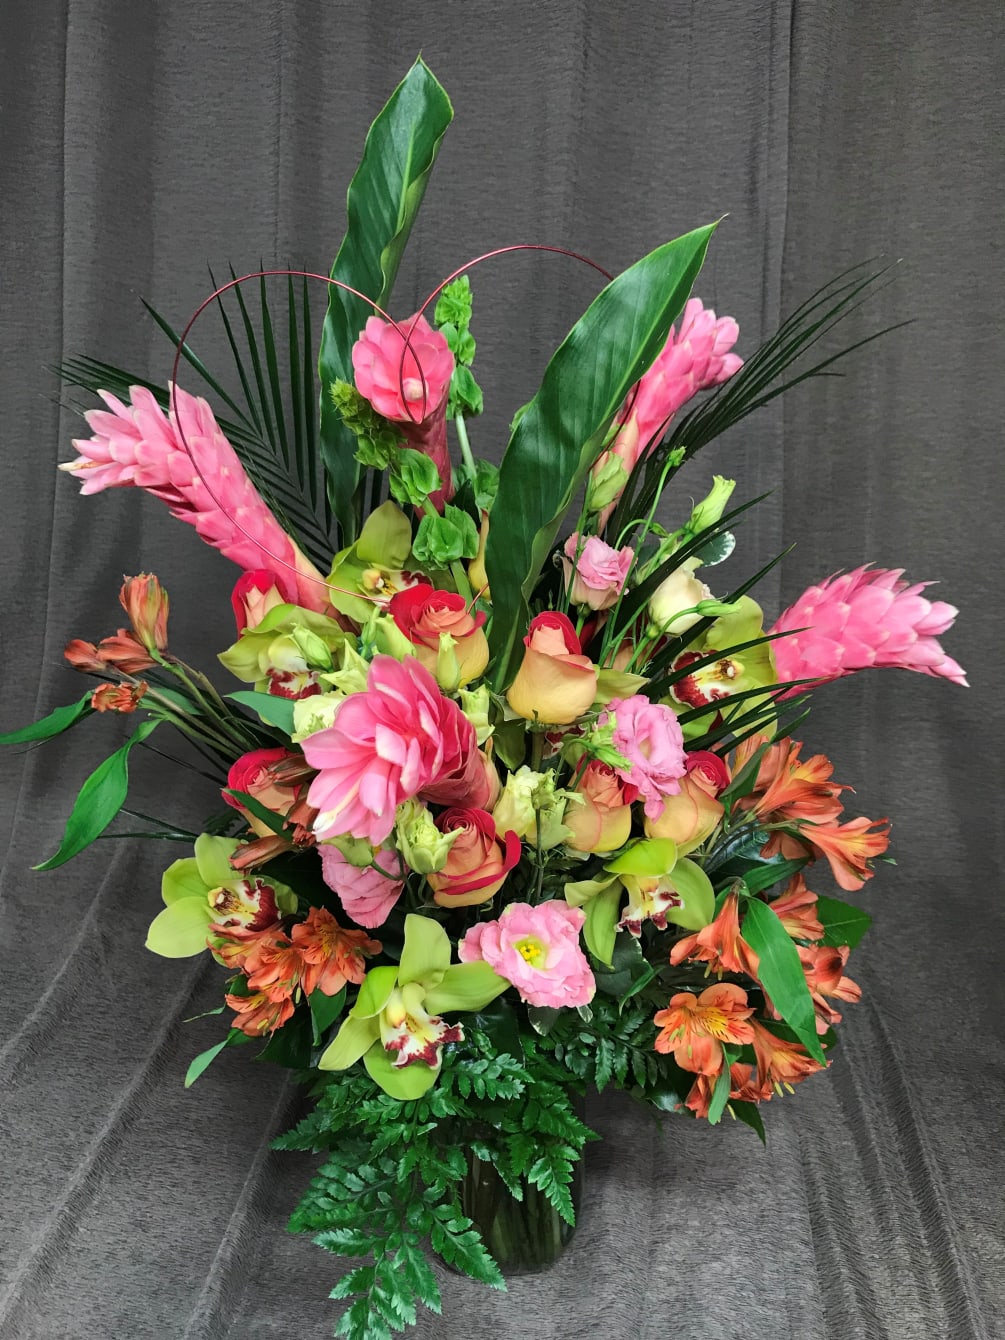 Tropical tall ginger and green accent flowers, seasonal flowers and beautiful Cymbidium